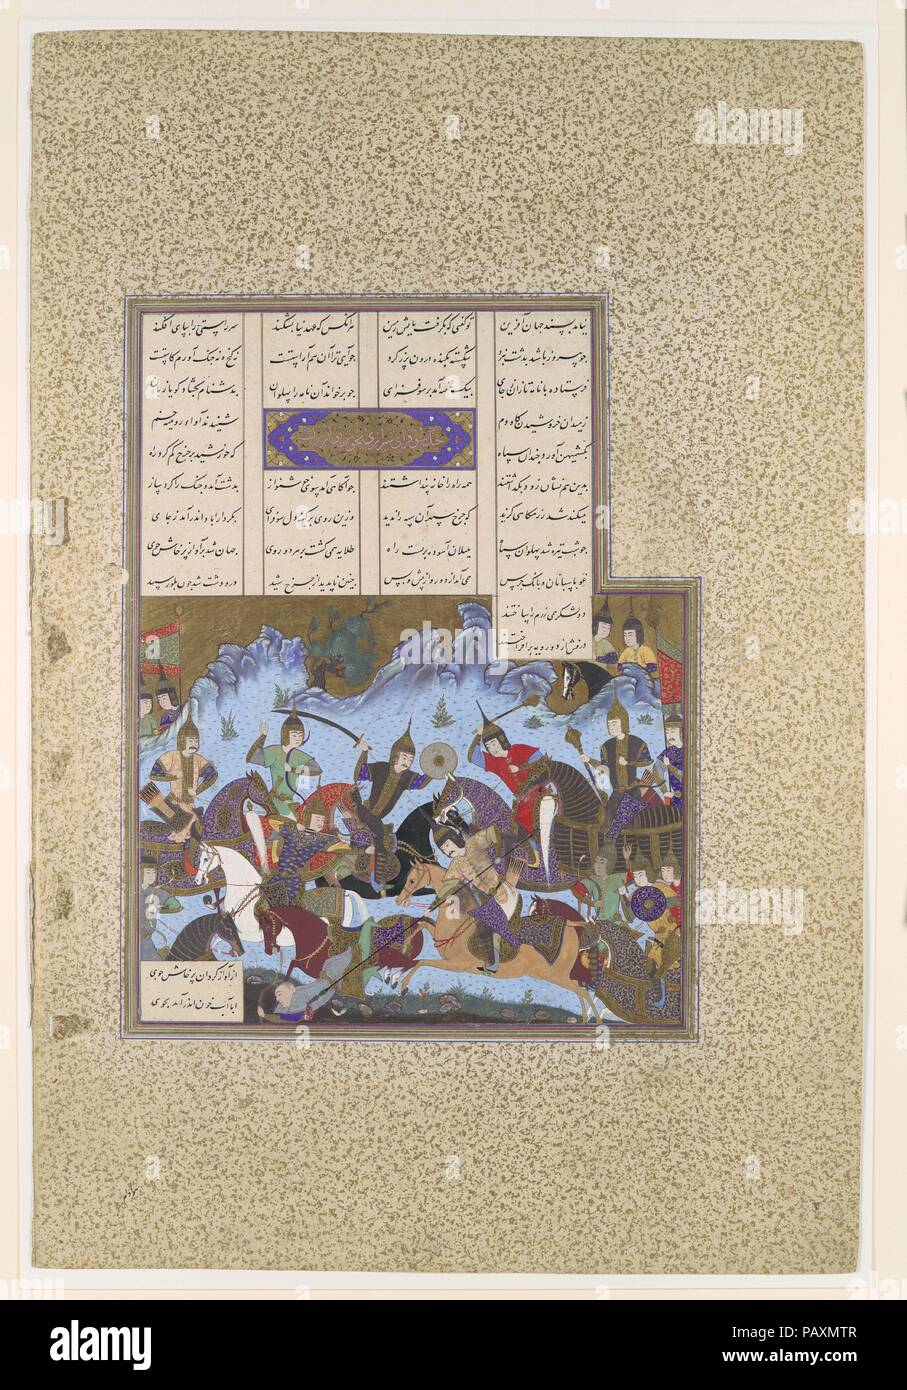 'Sufarai's Victory over the Haital', Folio 595v from the Shahnama (Book of Kings) of Shah Tahmasp. Artist: Painting attributed to Bashdan Qara (active ca. 1525-35). Author: Abu'l Qasim Firdausi (935-1020). Dimensions: Painting: H. 6 7/16 x W. 8 1/8 in. (H. 16.3 x W. 20.6 cm)  Entire Page: H. 18 5/8 x W. 12 1/2 in. (H. 47.3 x W. 31.8 cm). Date: ca. 1530-35.  Following the death of Shah Piruz at the hands of the Haital Turks and their leader, Khushnavaz, the shah's young son Prince Balash accedes to the throne under the regency of the paladin Sufaray, who raises an army to avenge the death of Pi Stock Photo